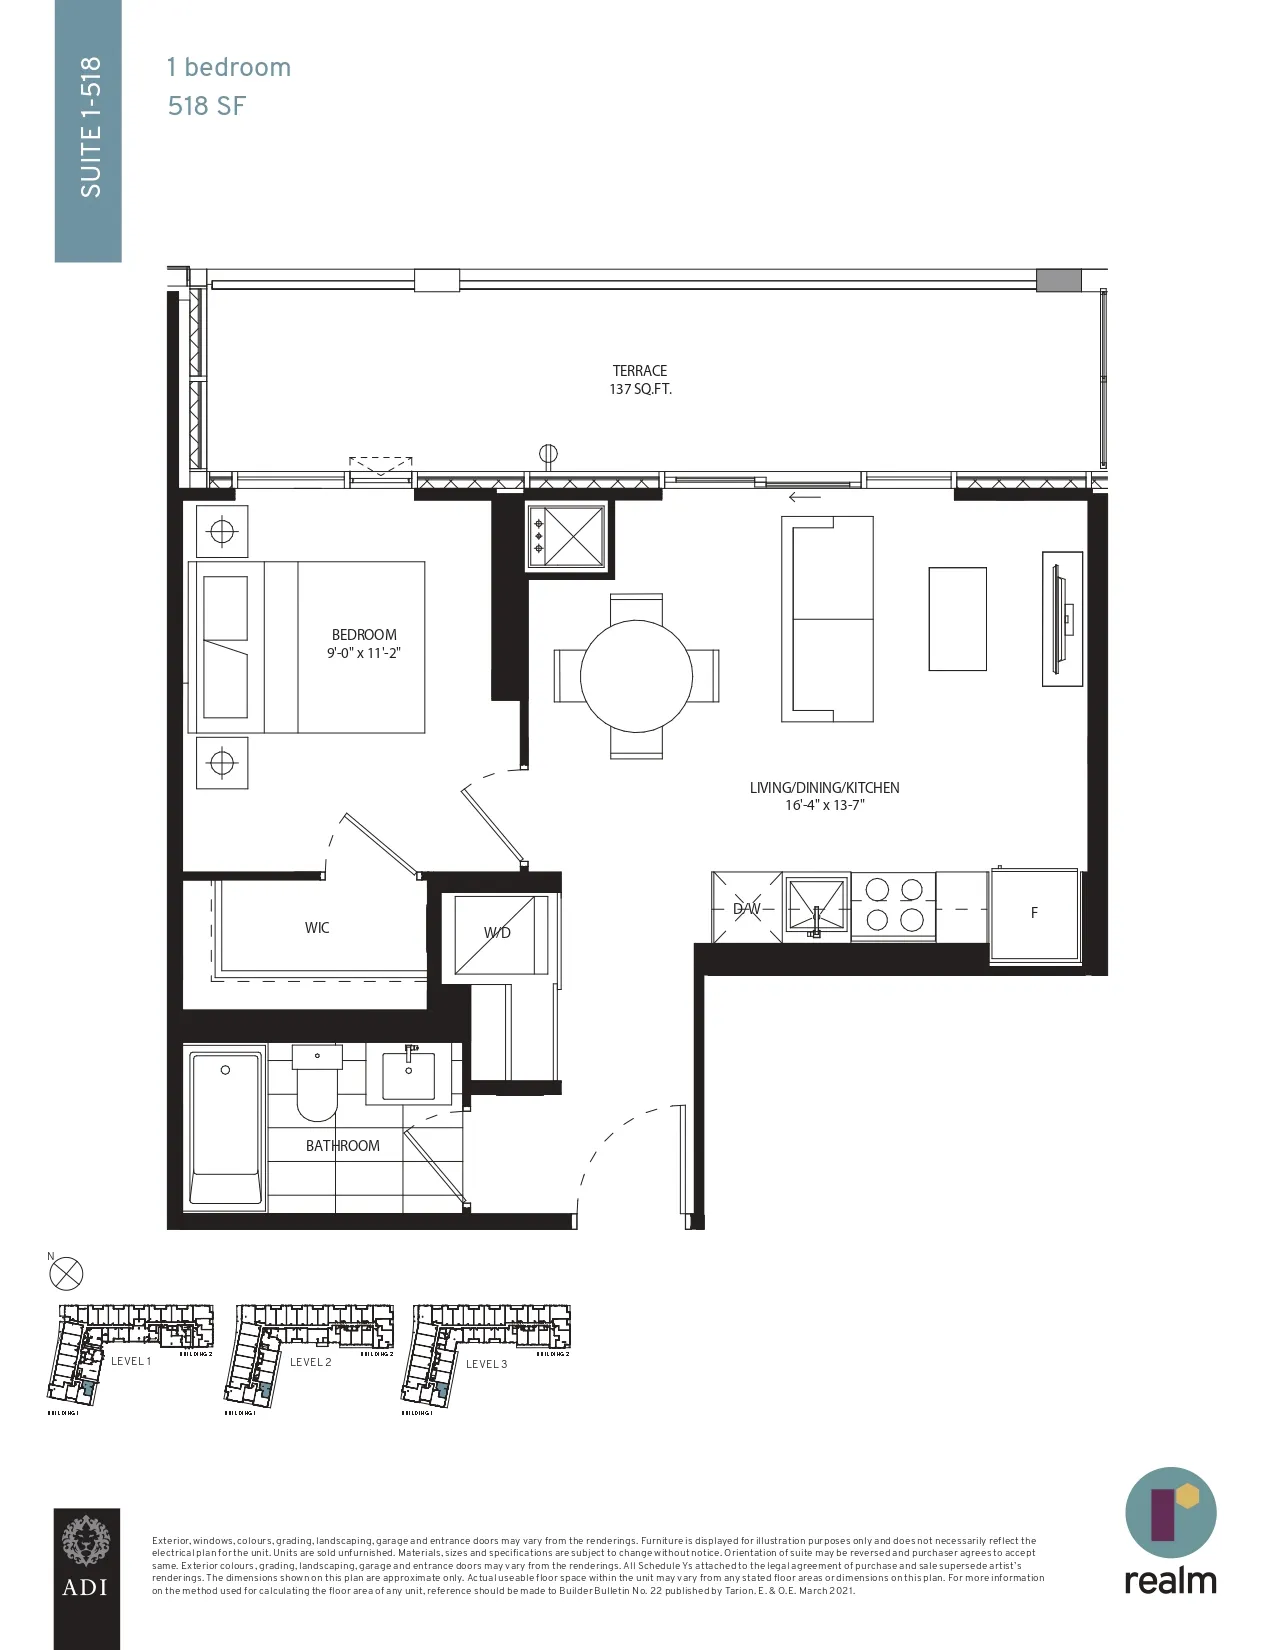  Floor Plan of Realm Condos with undefined beds